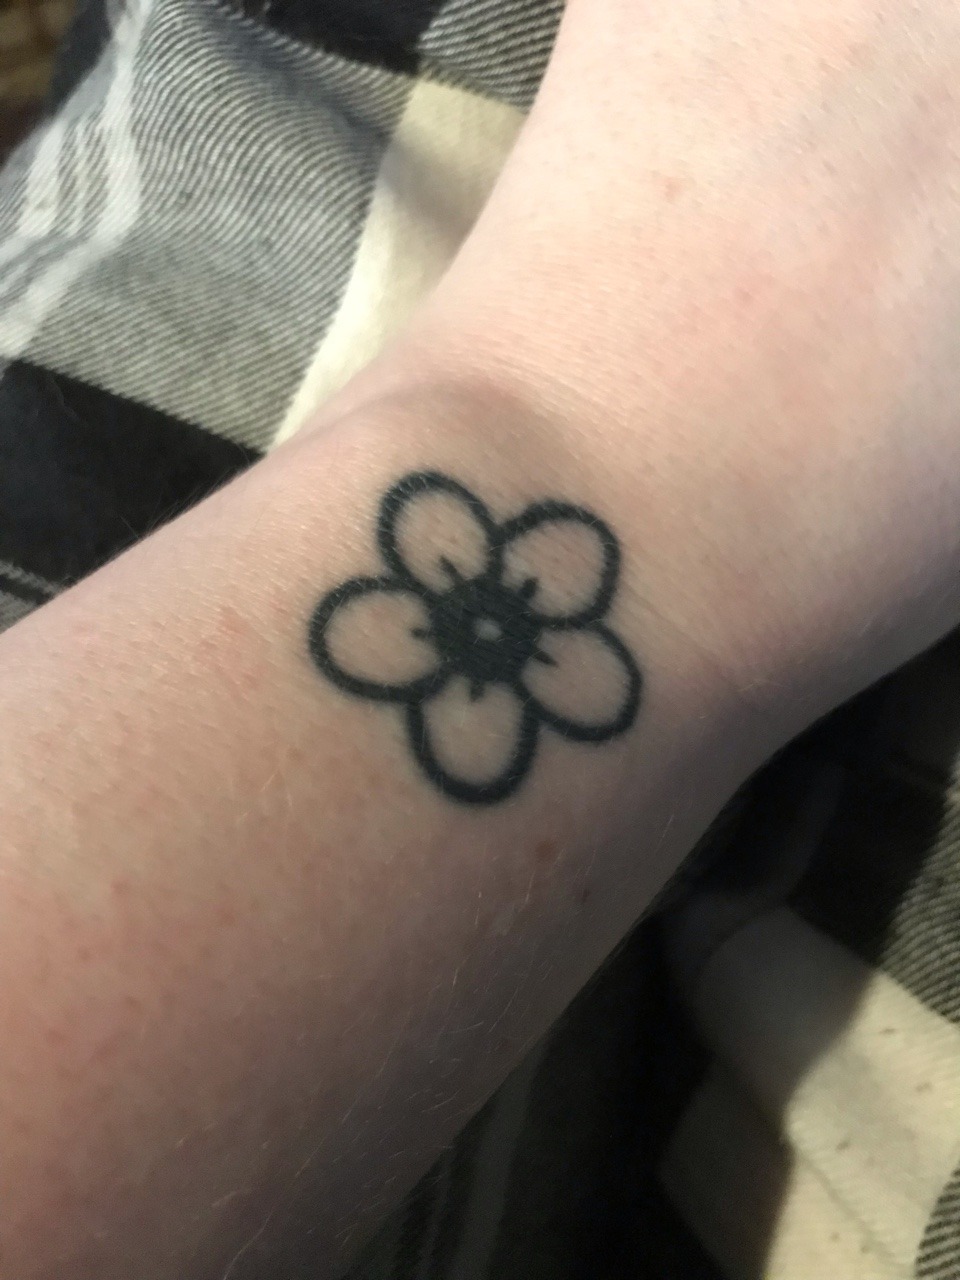 Scribbles — I will die on “Emma's tattoo is a forget-me-not,...